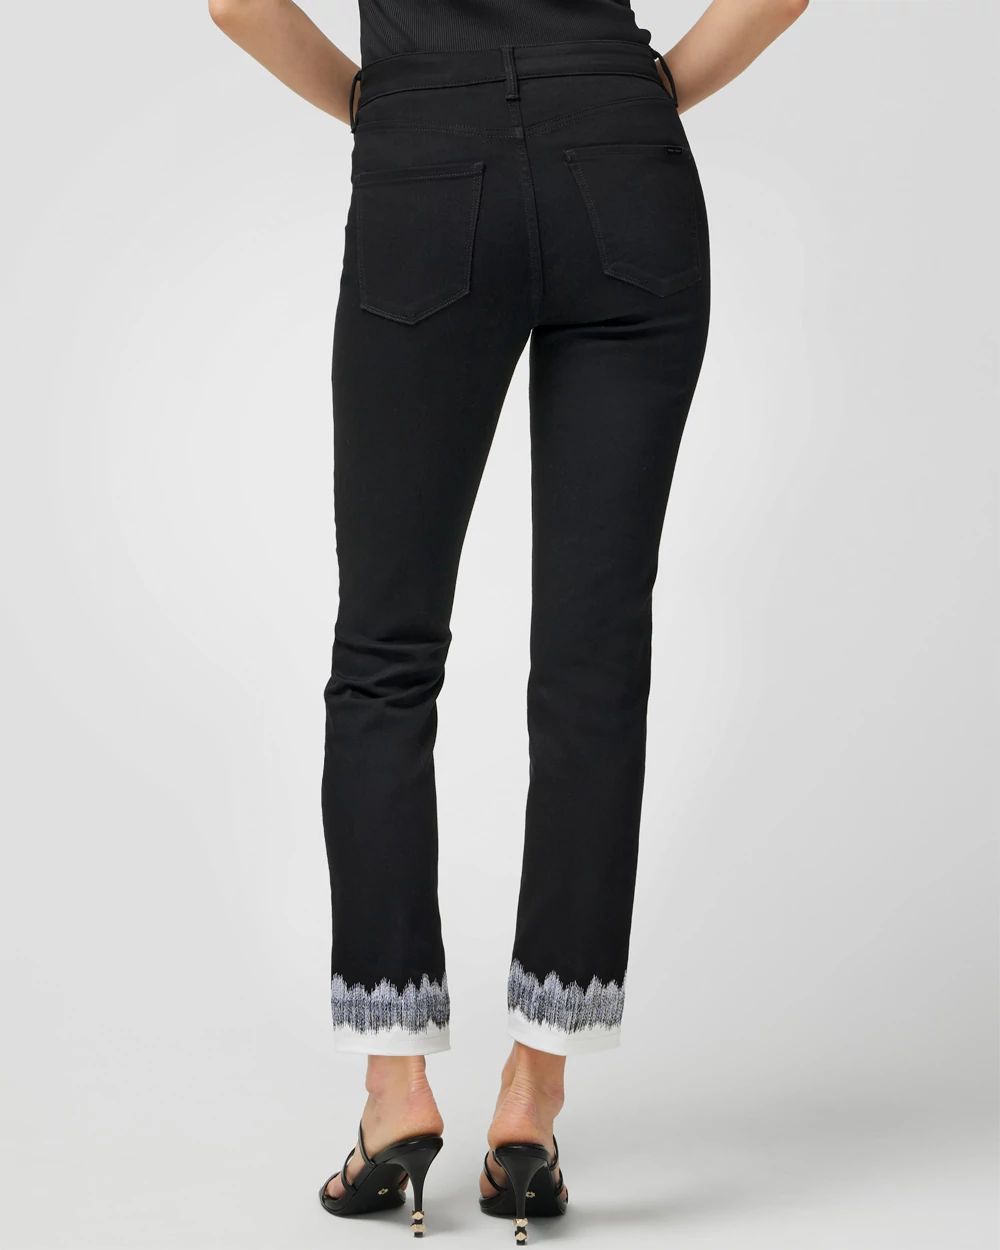 Petite High-Rise Embroidered Cuff Slim Crop Jeans click to view larger image.